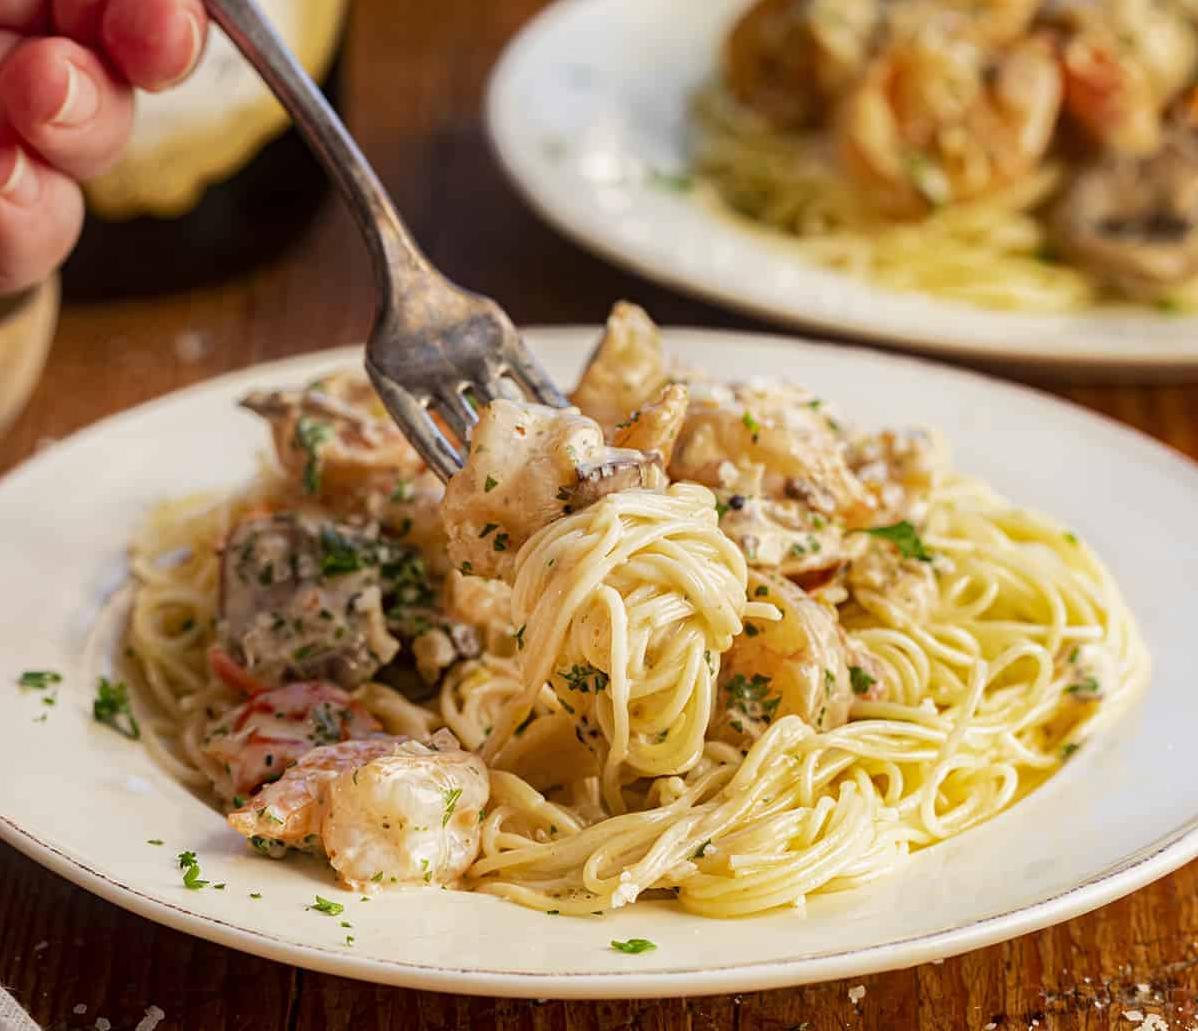  This shrimp and pasta recipe is perfect for date night - it's fancy but easy to make!